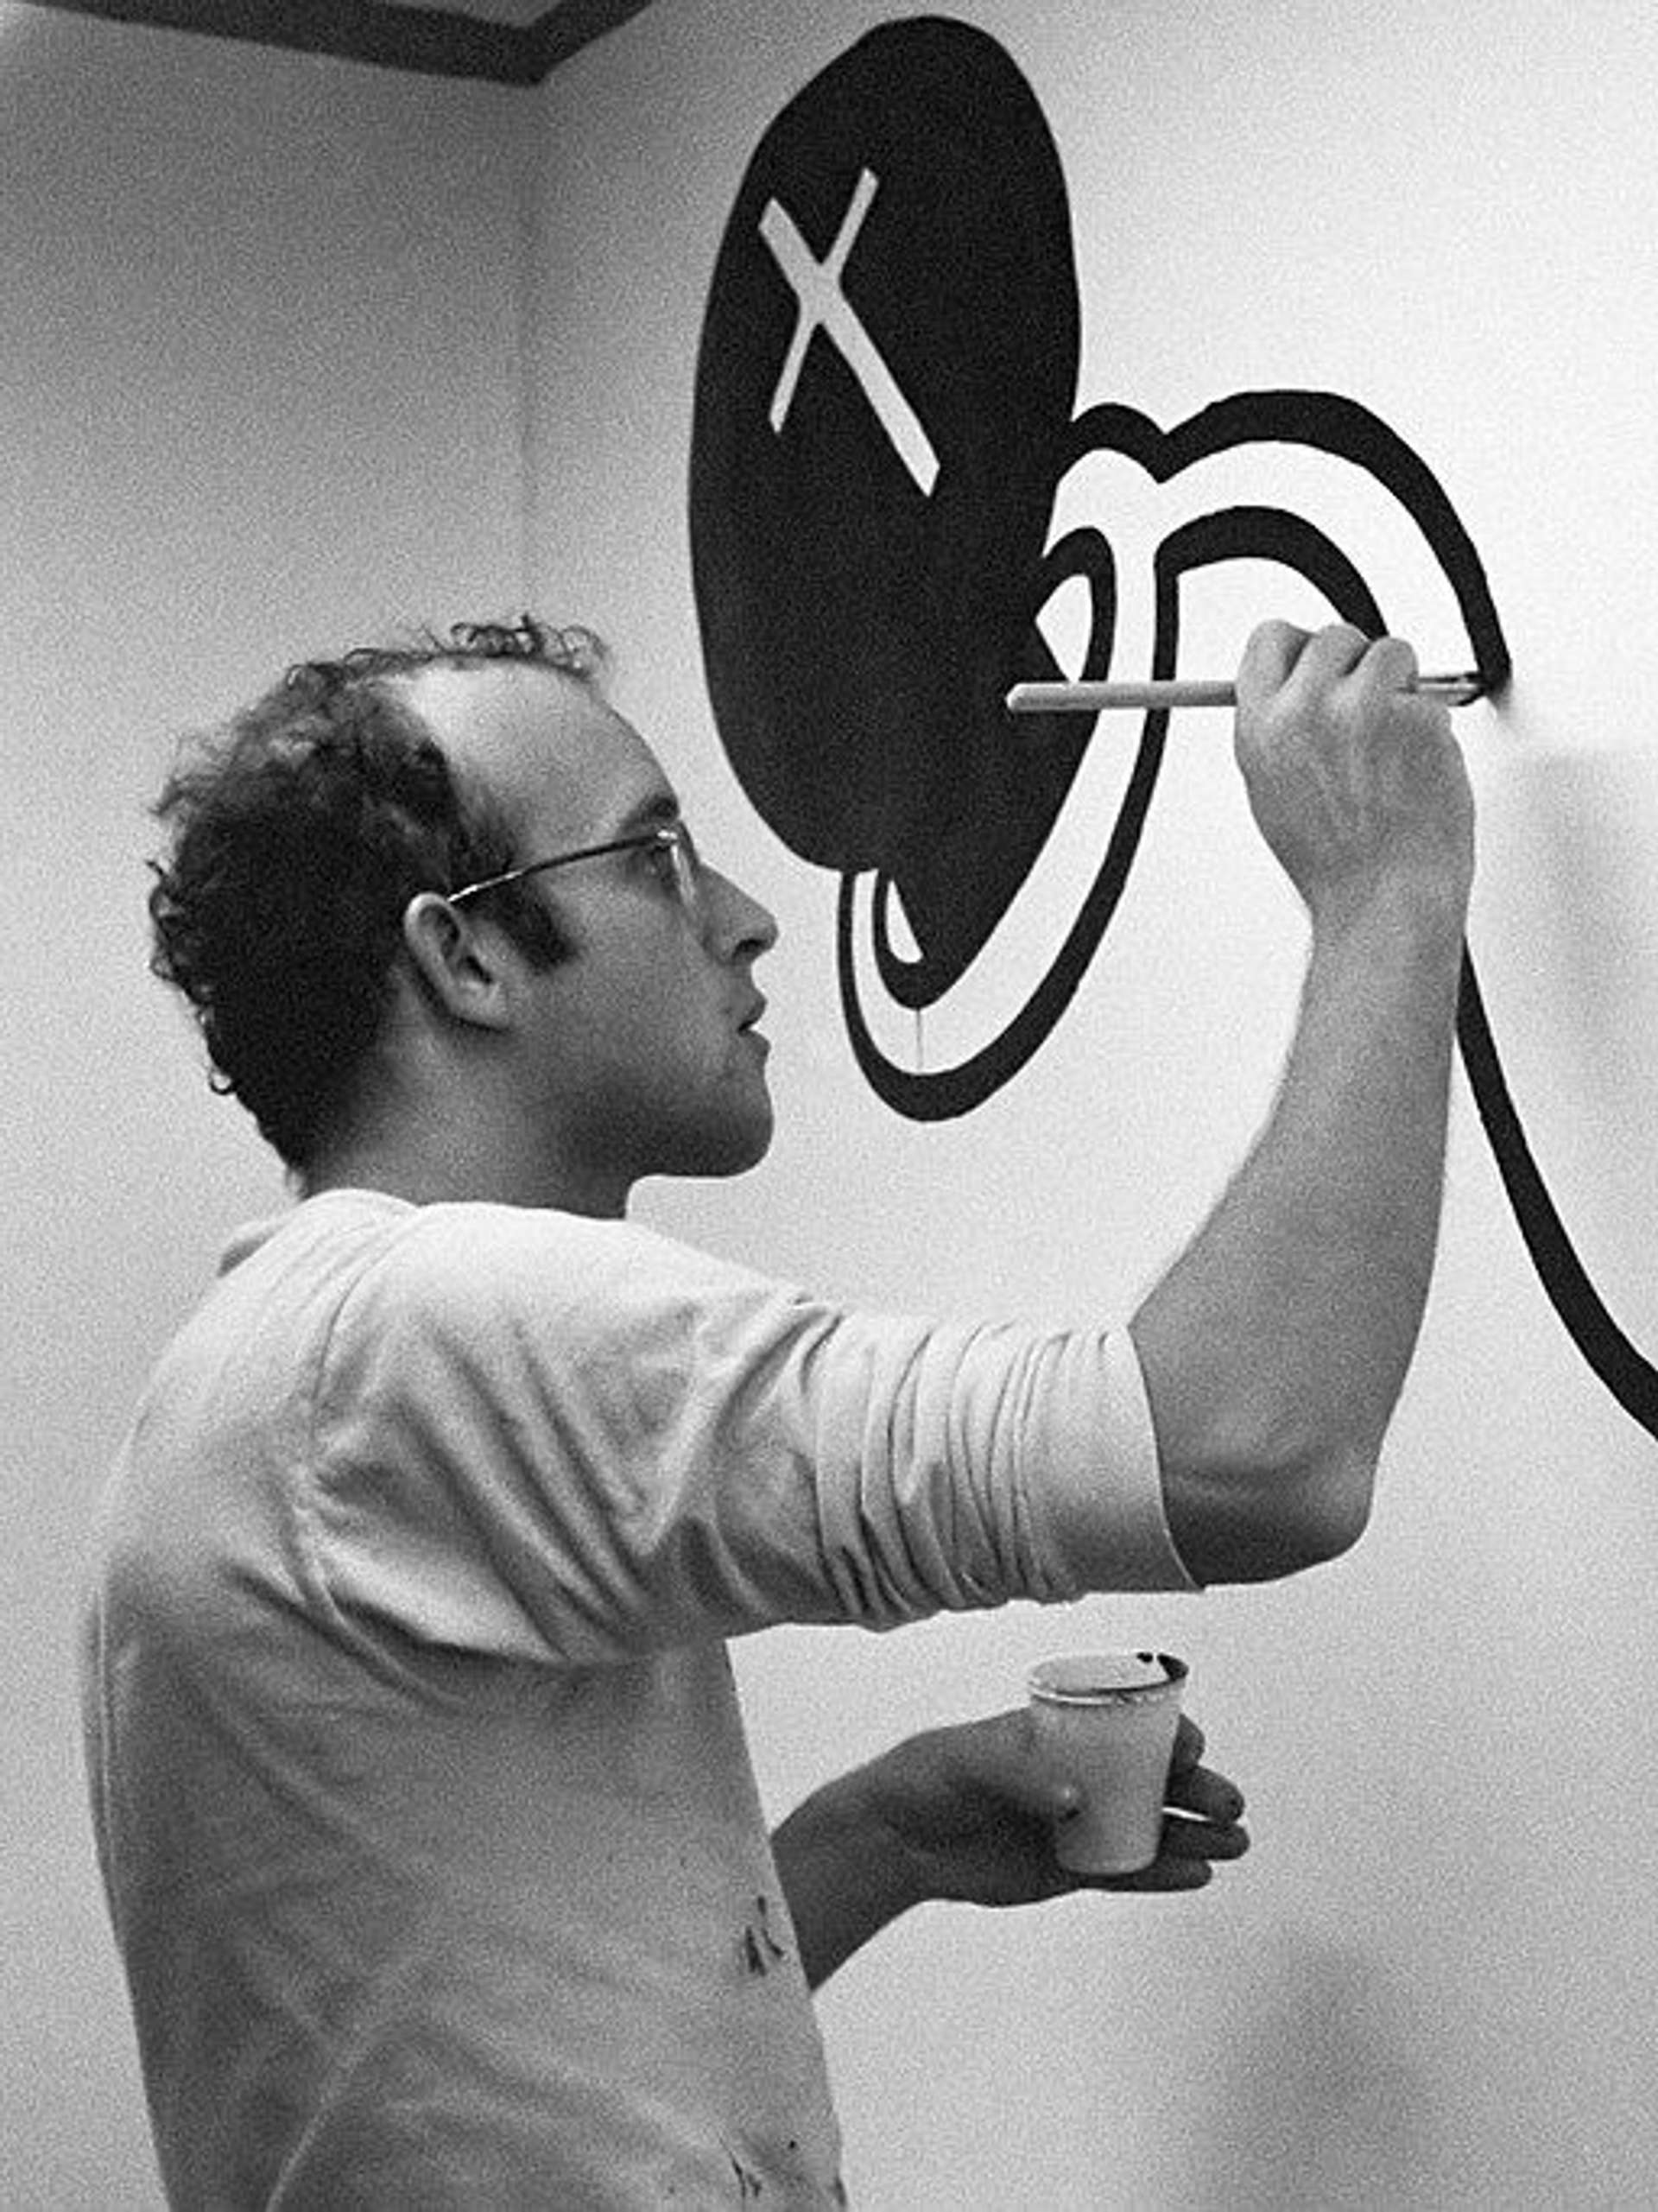 Keith Haring painting line art onto a wall